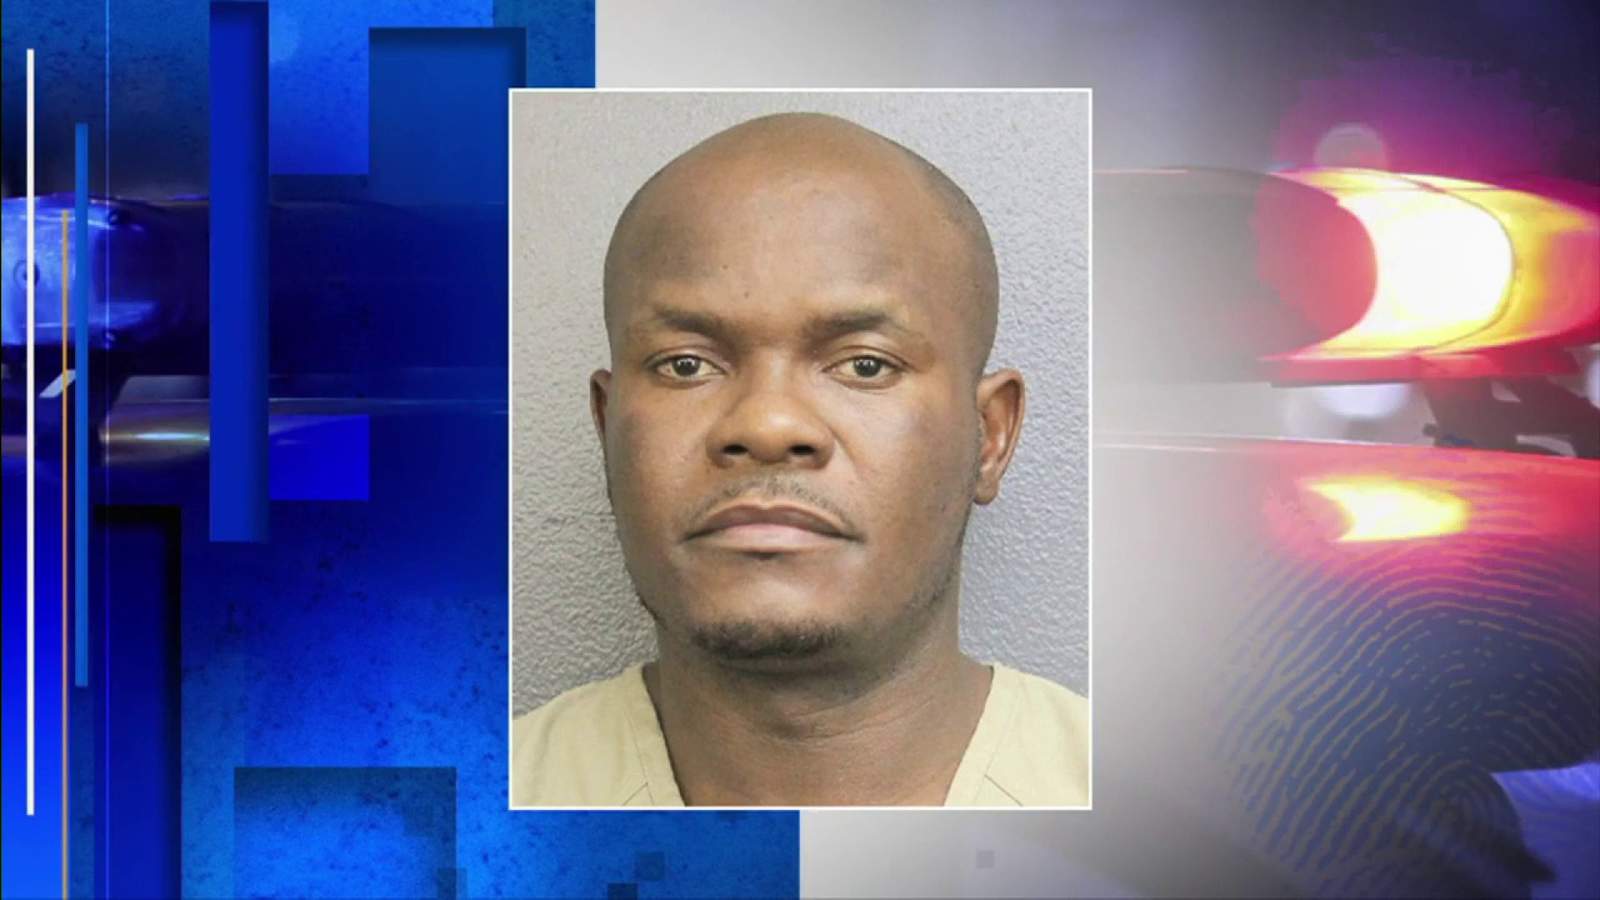 Fort Lauderdale man raped woman after posing as Uber driver, police say